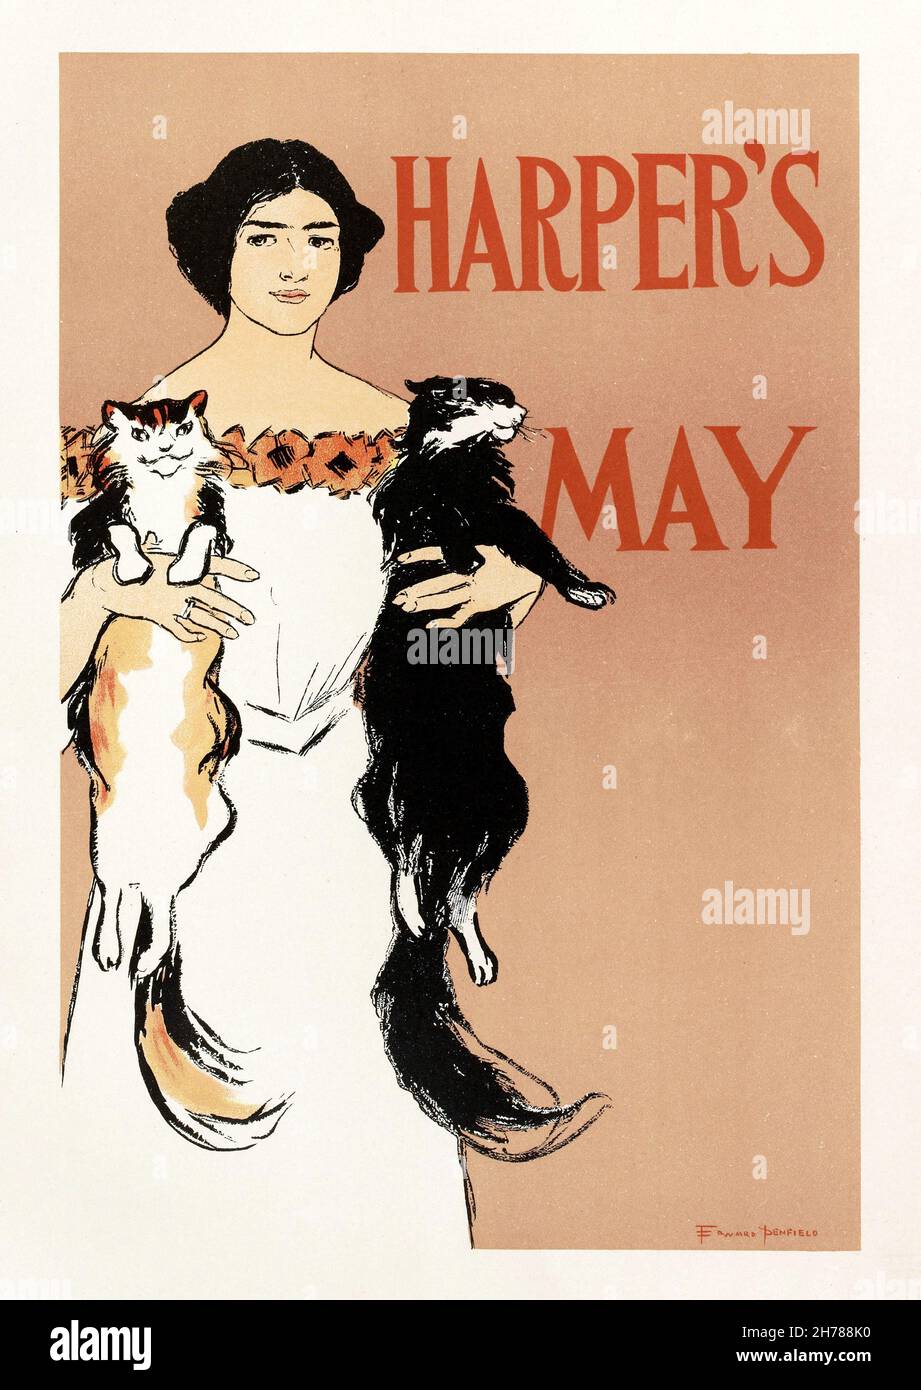 Young lady holding two cats in Poster advertising the May issue of Harper’s magazine by Edward Penfield1890s Stock Photo